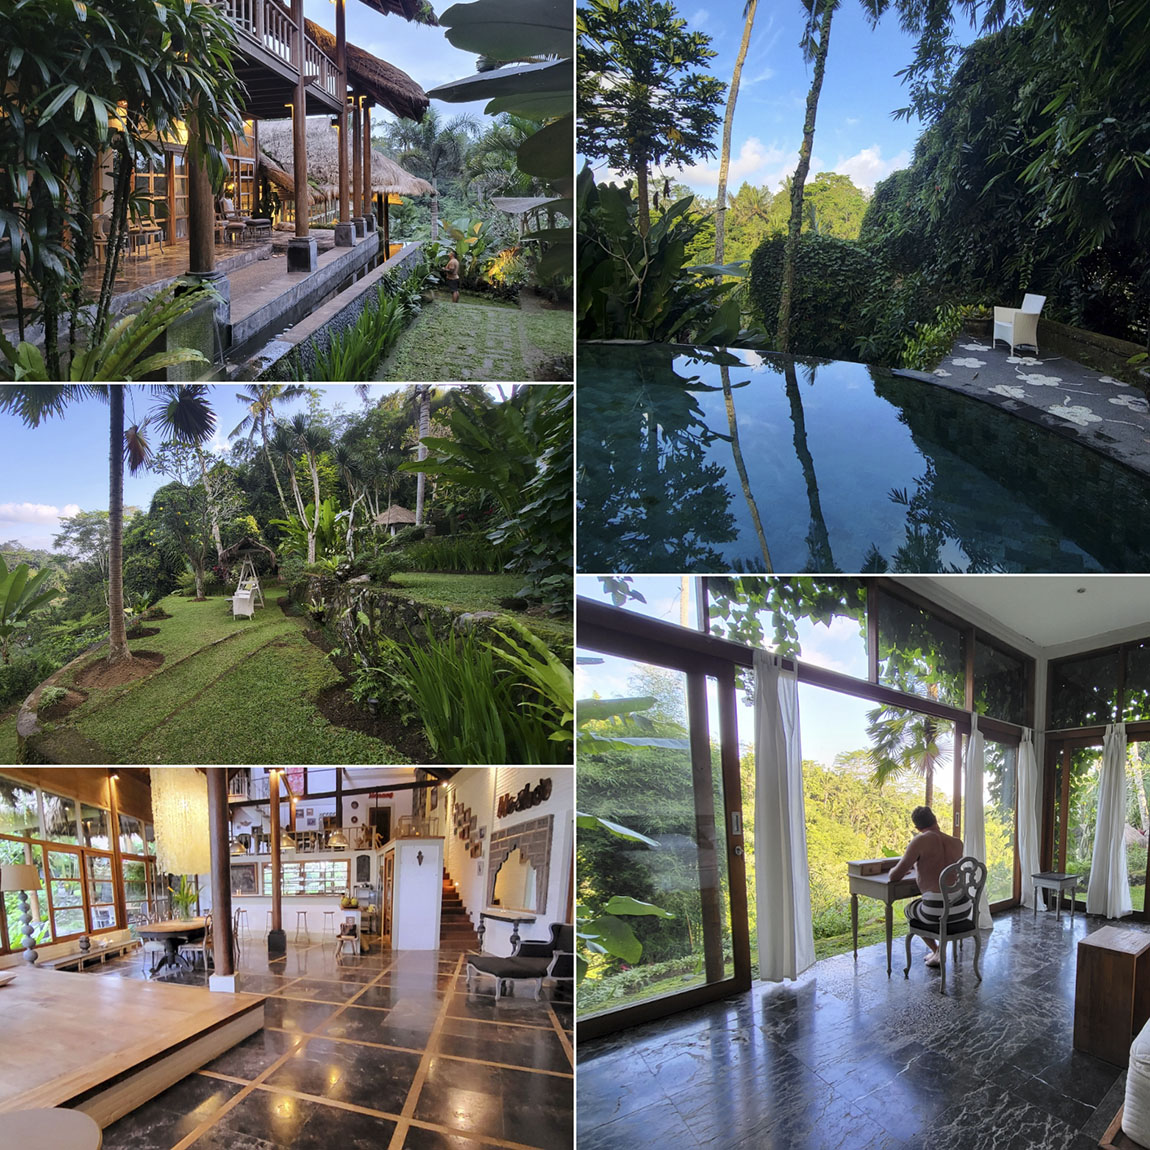 BALI-HAUS: NEW MIND, BODY AND SPIRIT: 1:1 RETREATS IN LUXURY NATURE OASES IN BALI AND SWITZERLAND